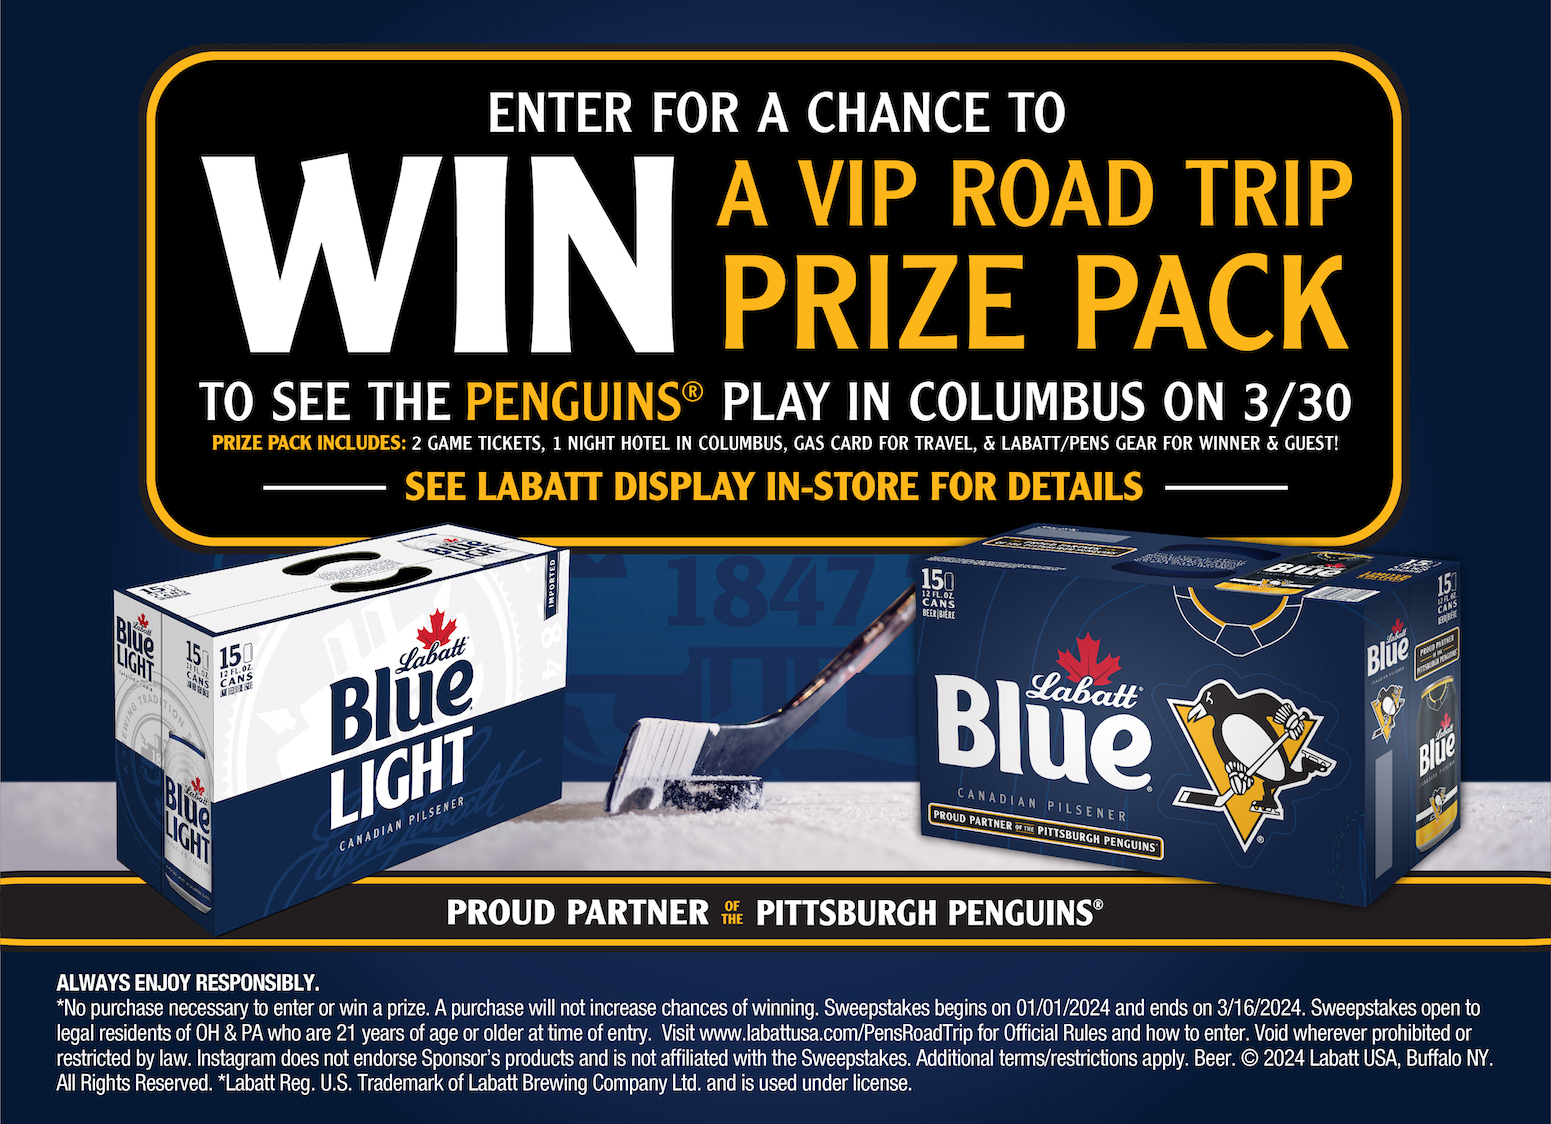 Enter for a chance to win a VIP road trip prize pack to see the Penguins play in Columbus on 3/30